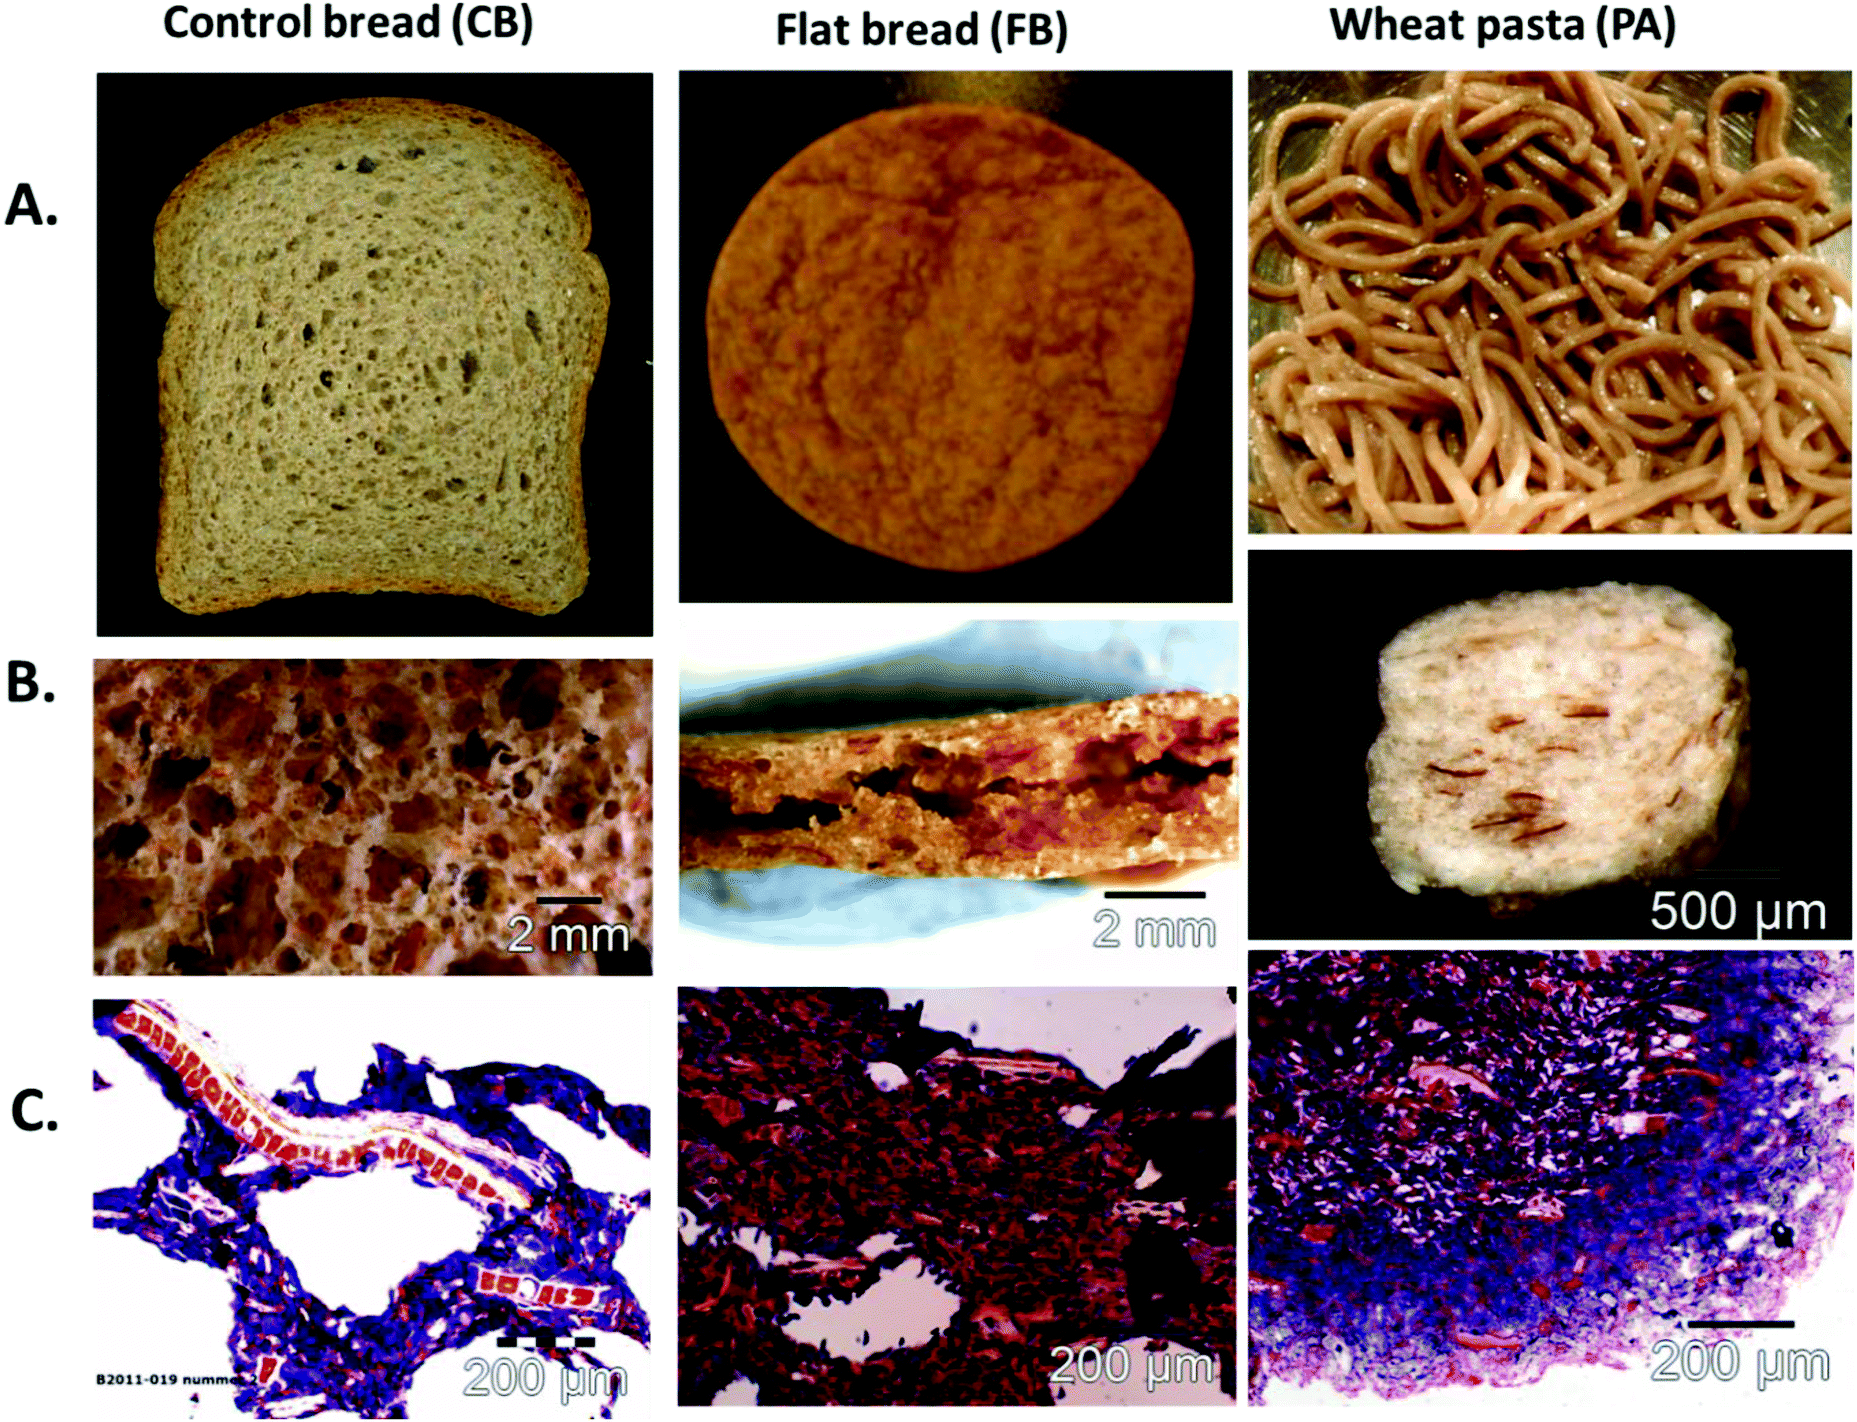 The structure of wheat bread influences the postprandial metabolic response  in healthy men - Food & Function (RSC Publishing) DOI:10.1039/C5FO00354G